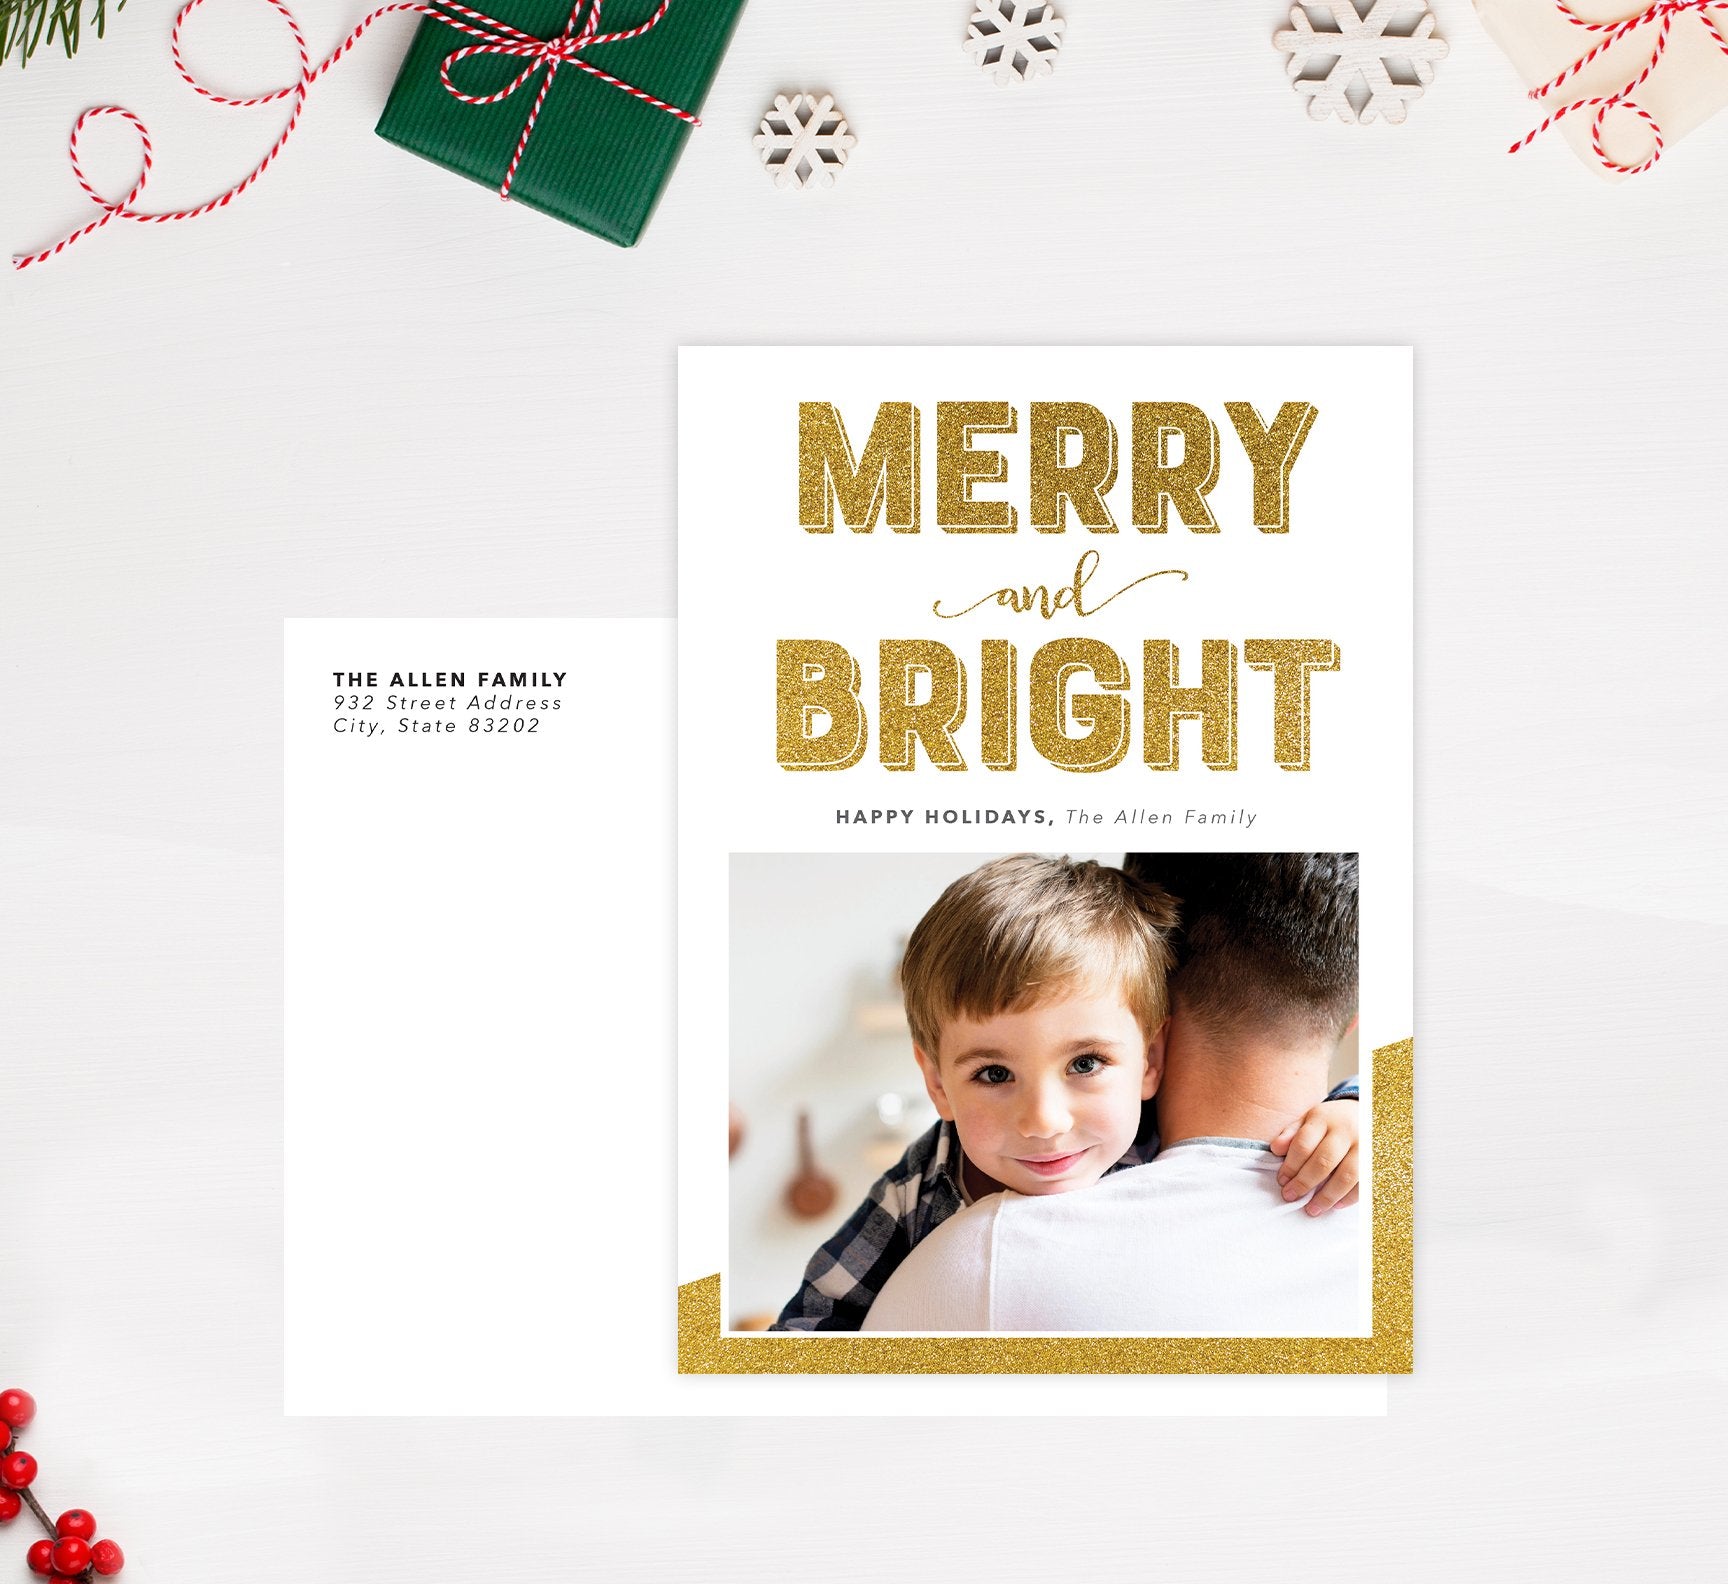 Merry and Bright Holiday Card; Holiday card with envelope and return address printed on it. 